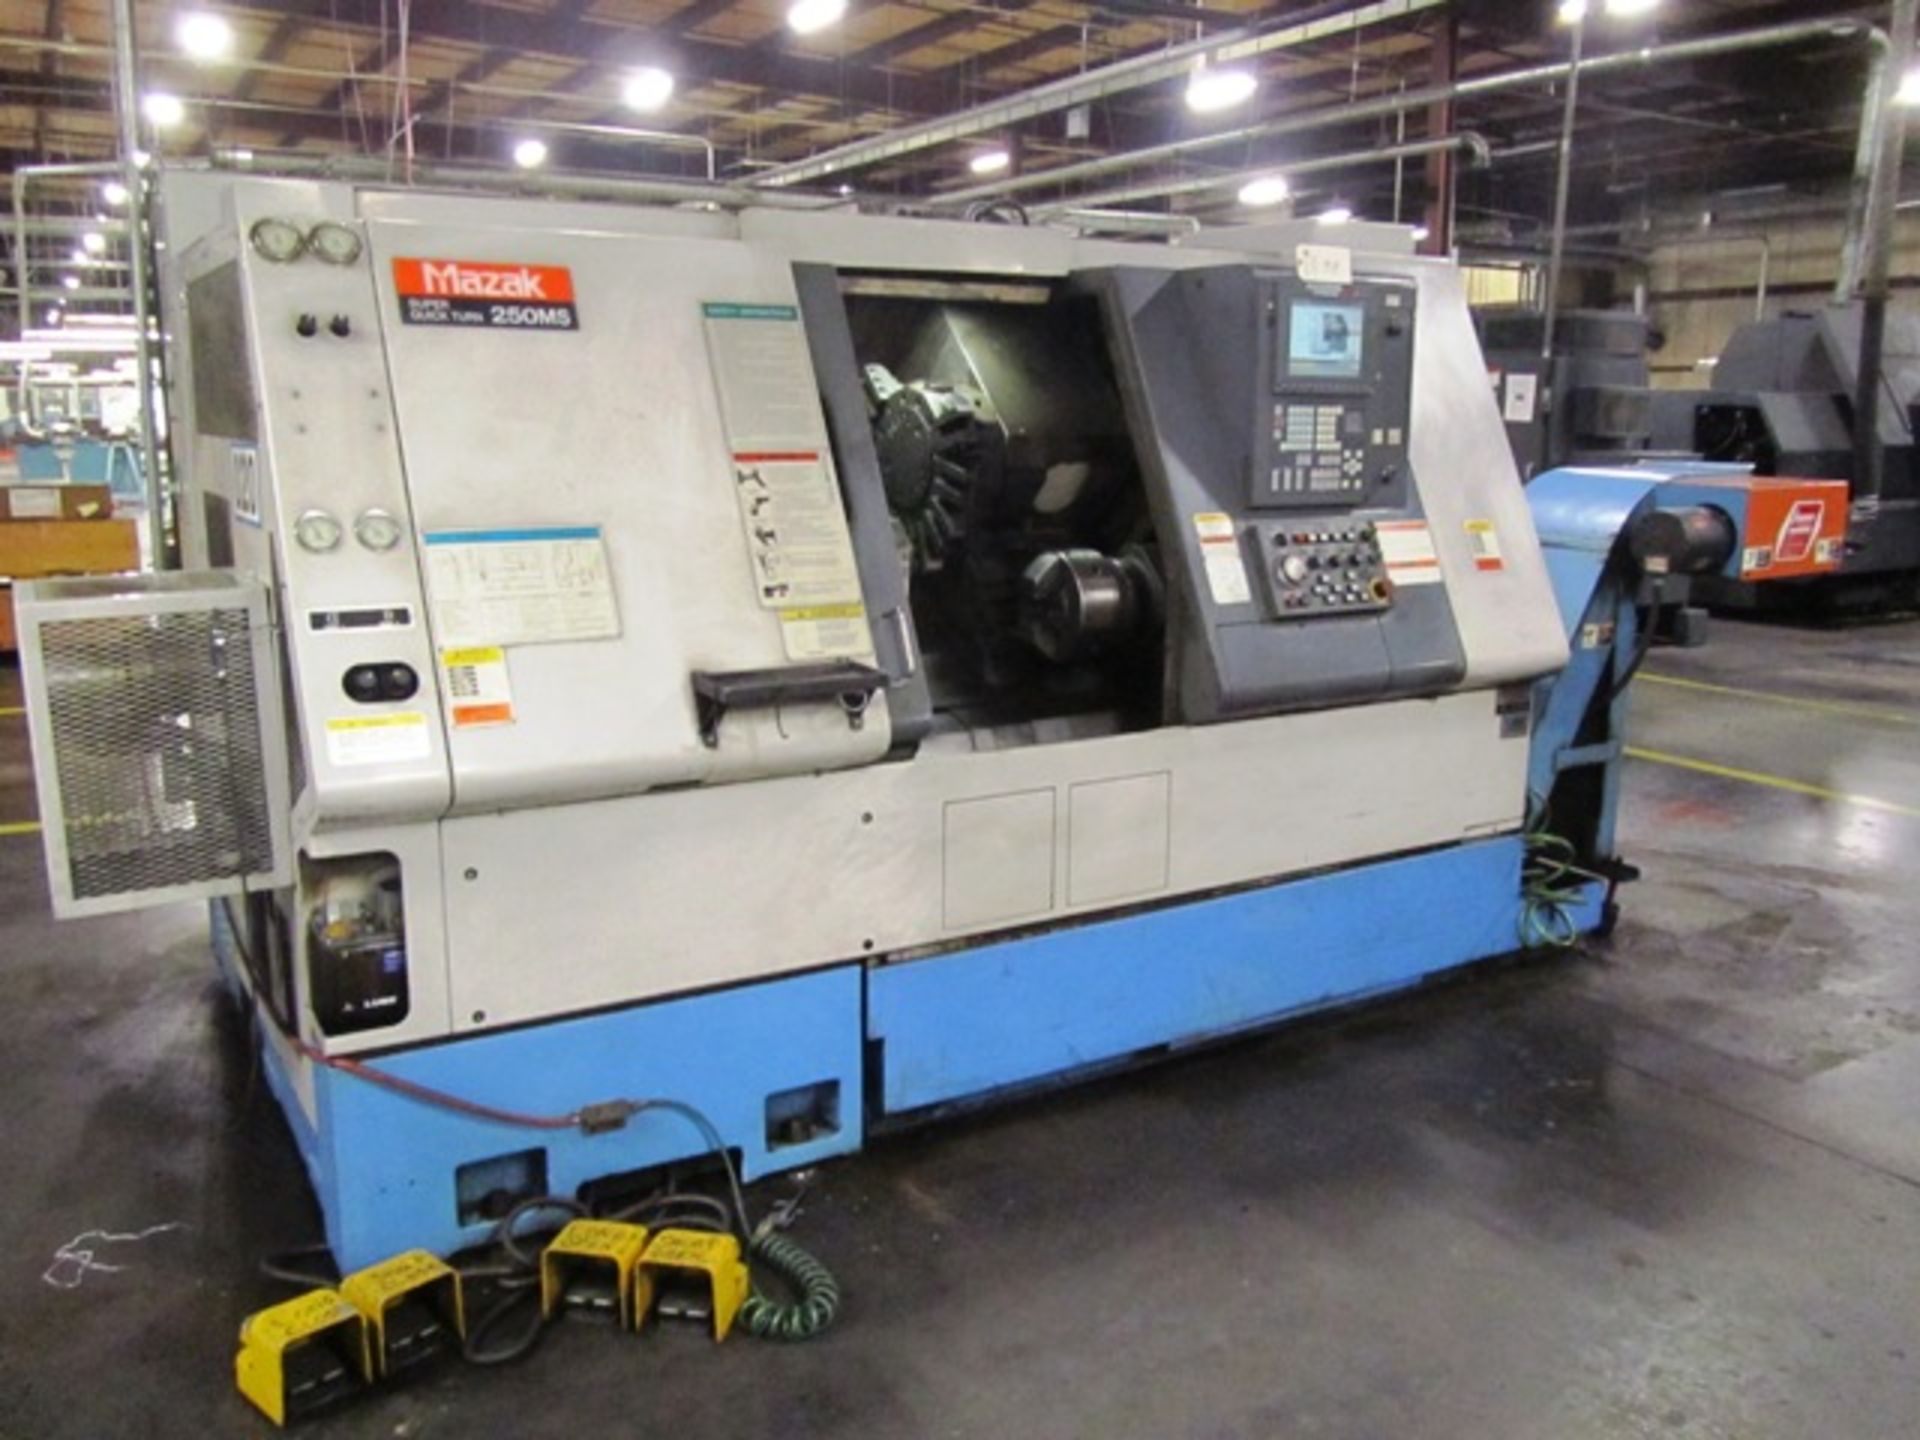 Mazak Super Quick Turn 250 MS CNC Turning Center with Milling & Sub-Spindle, 10'' Main Spindle, 10'' - Image 3 of 4